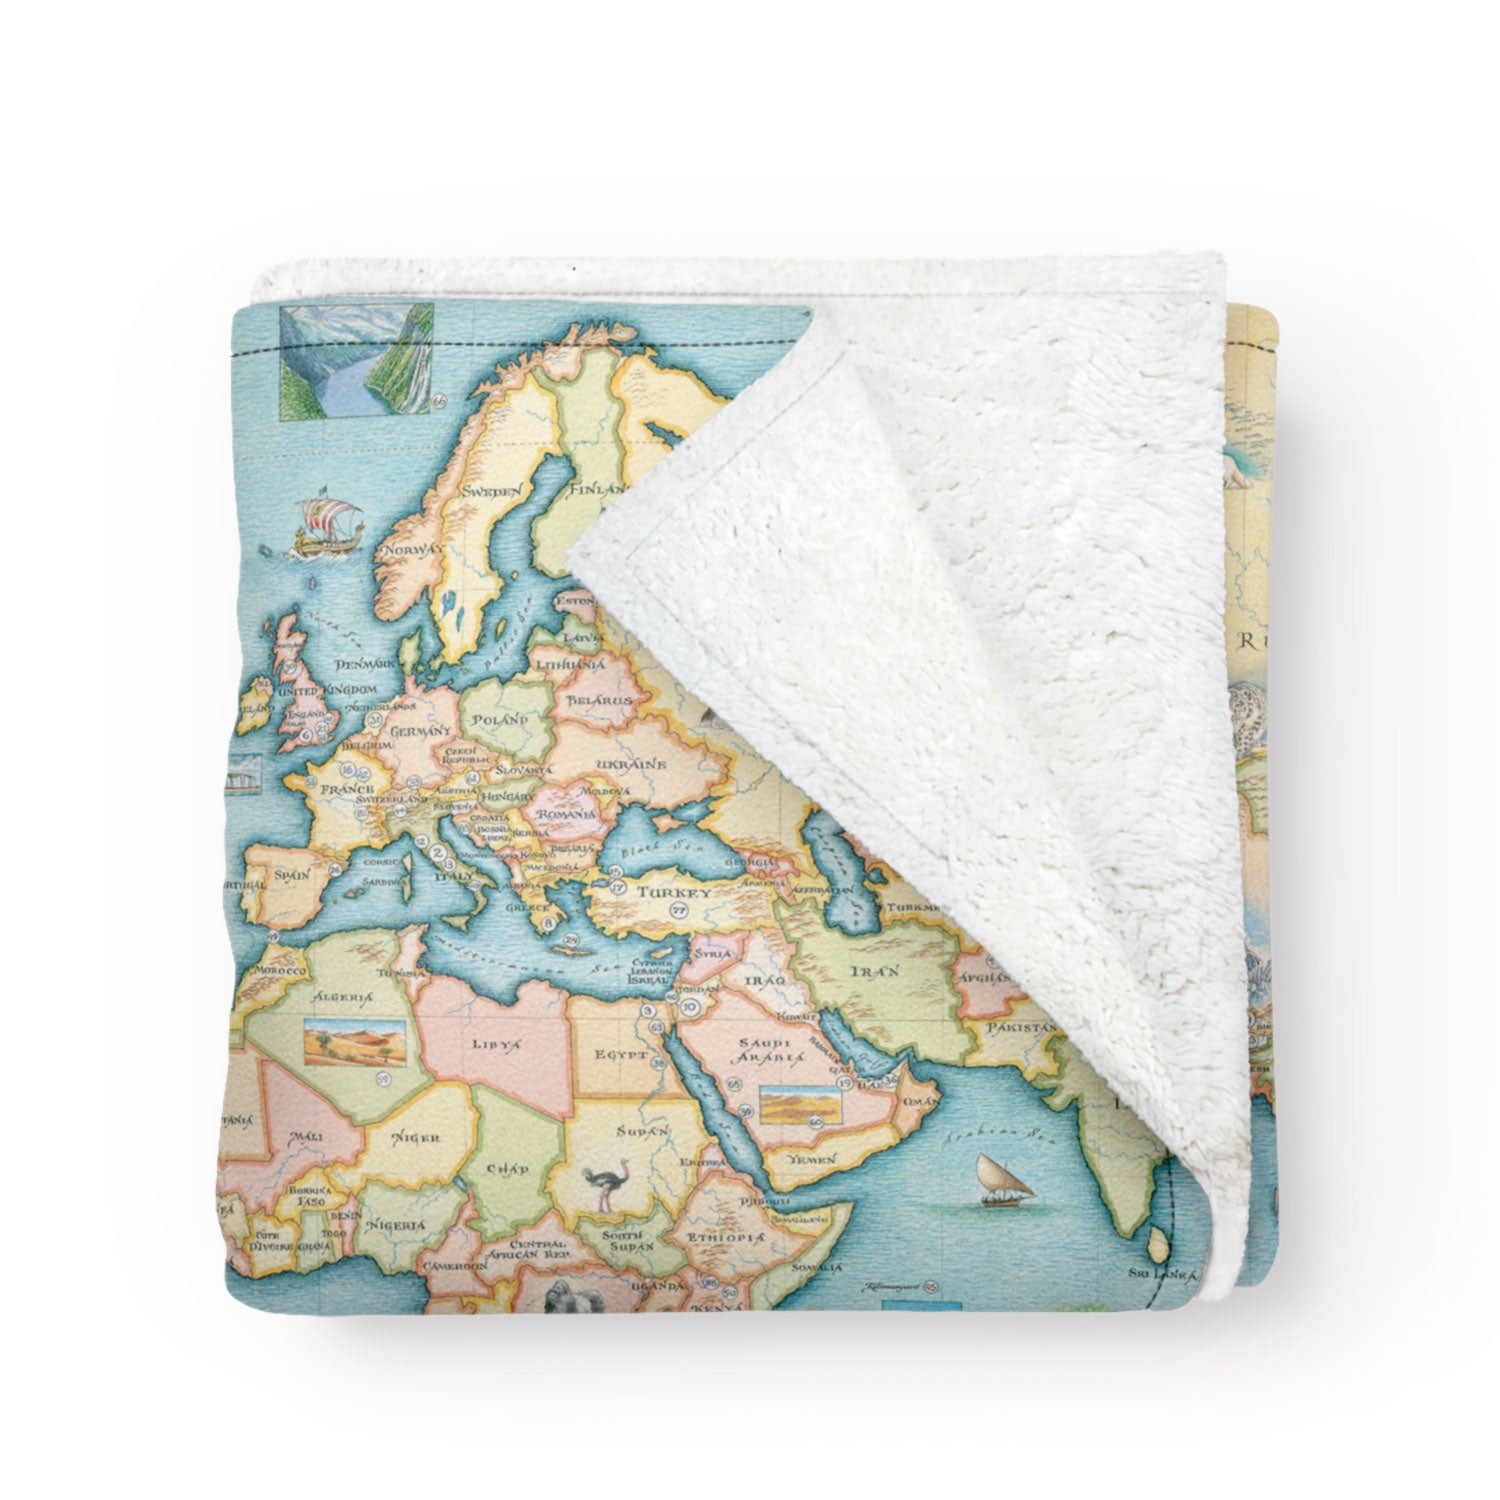 Folded fleece blanket with map of the World on it. Soft and cozy map blanket